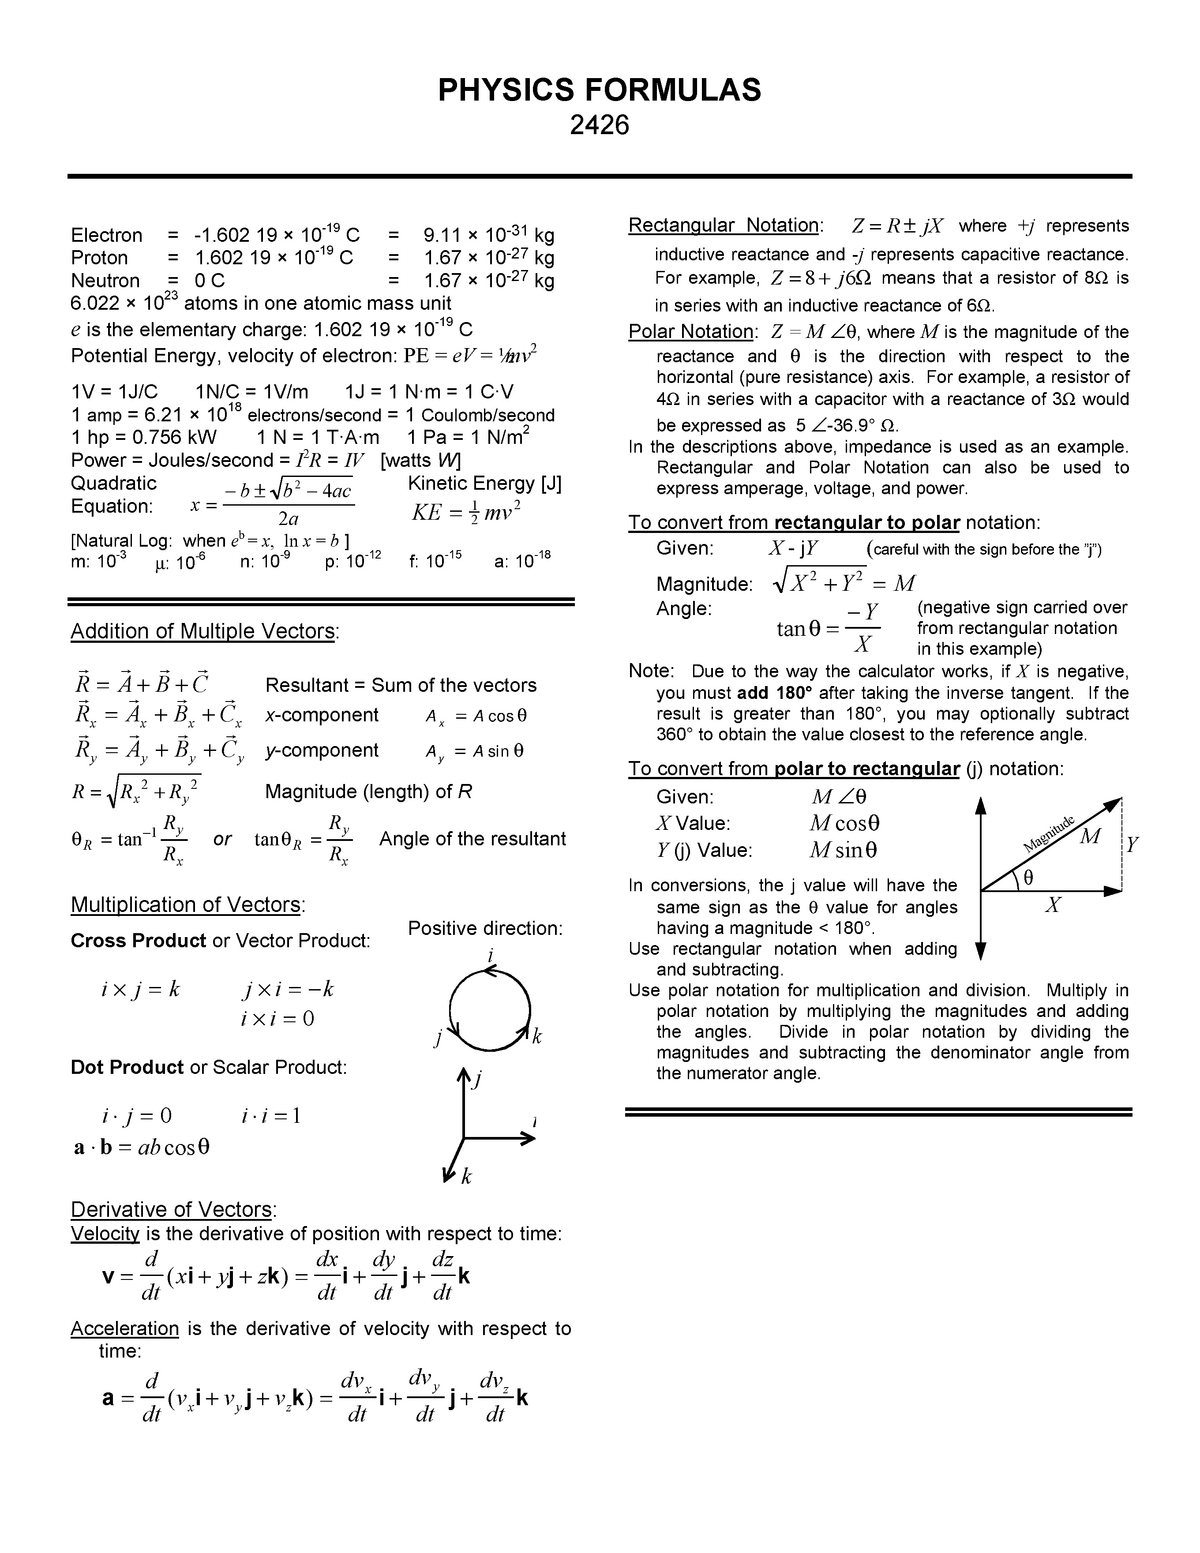 Cheatsheet - All important formulas for the course are included ...